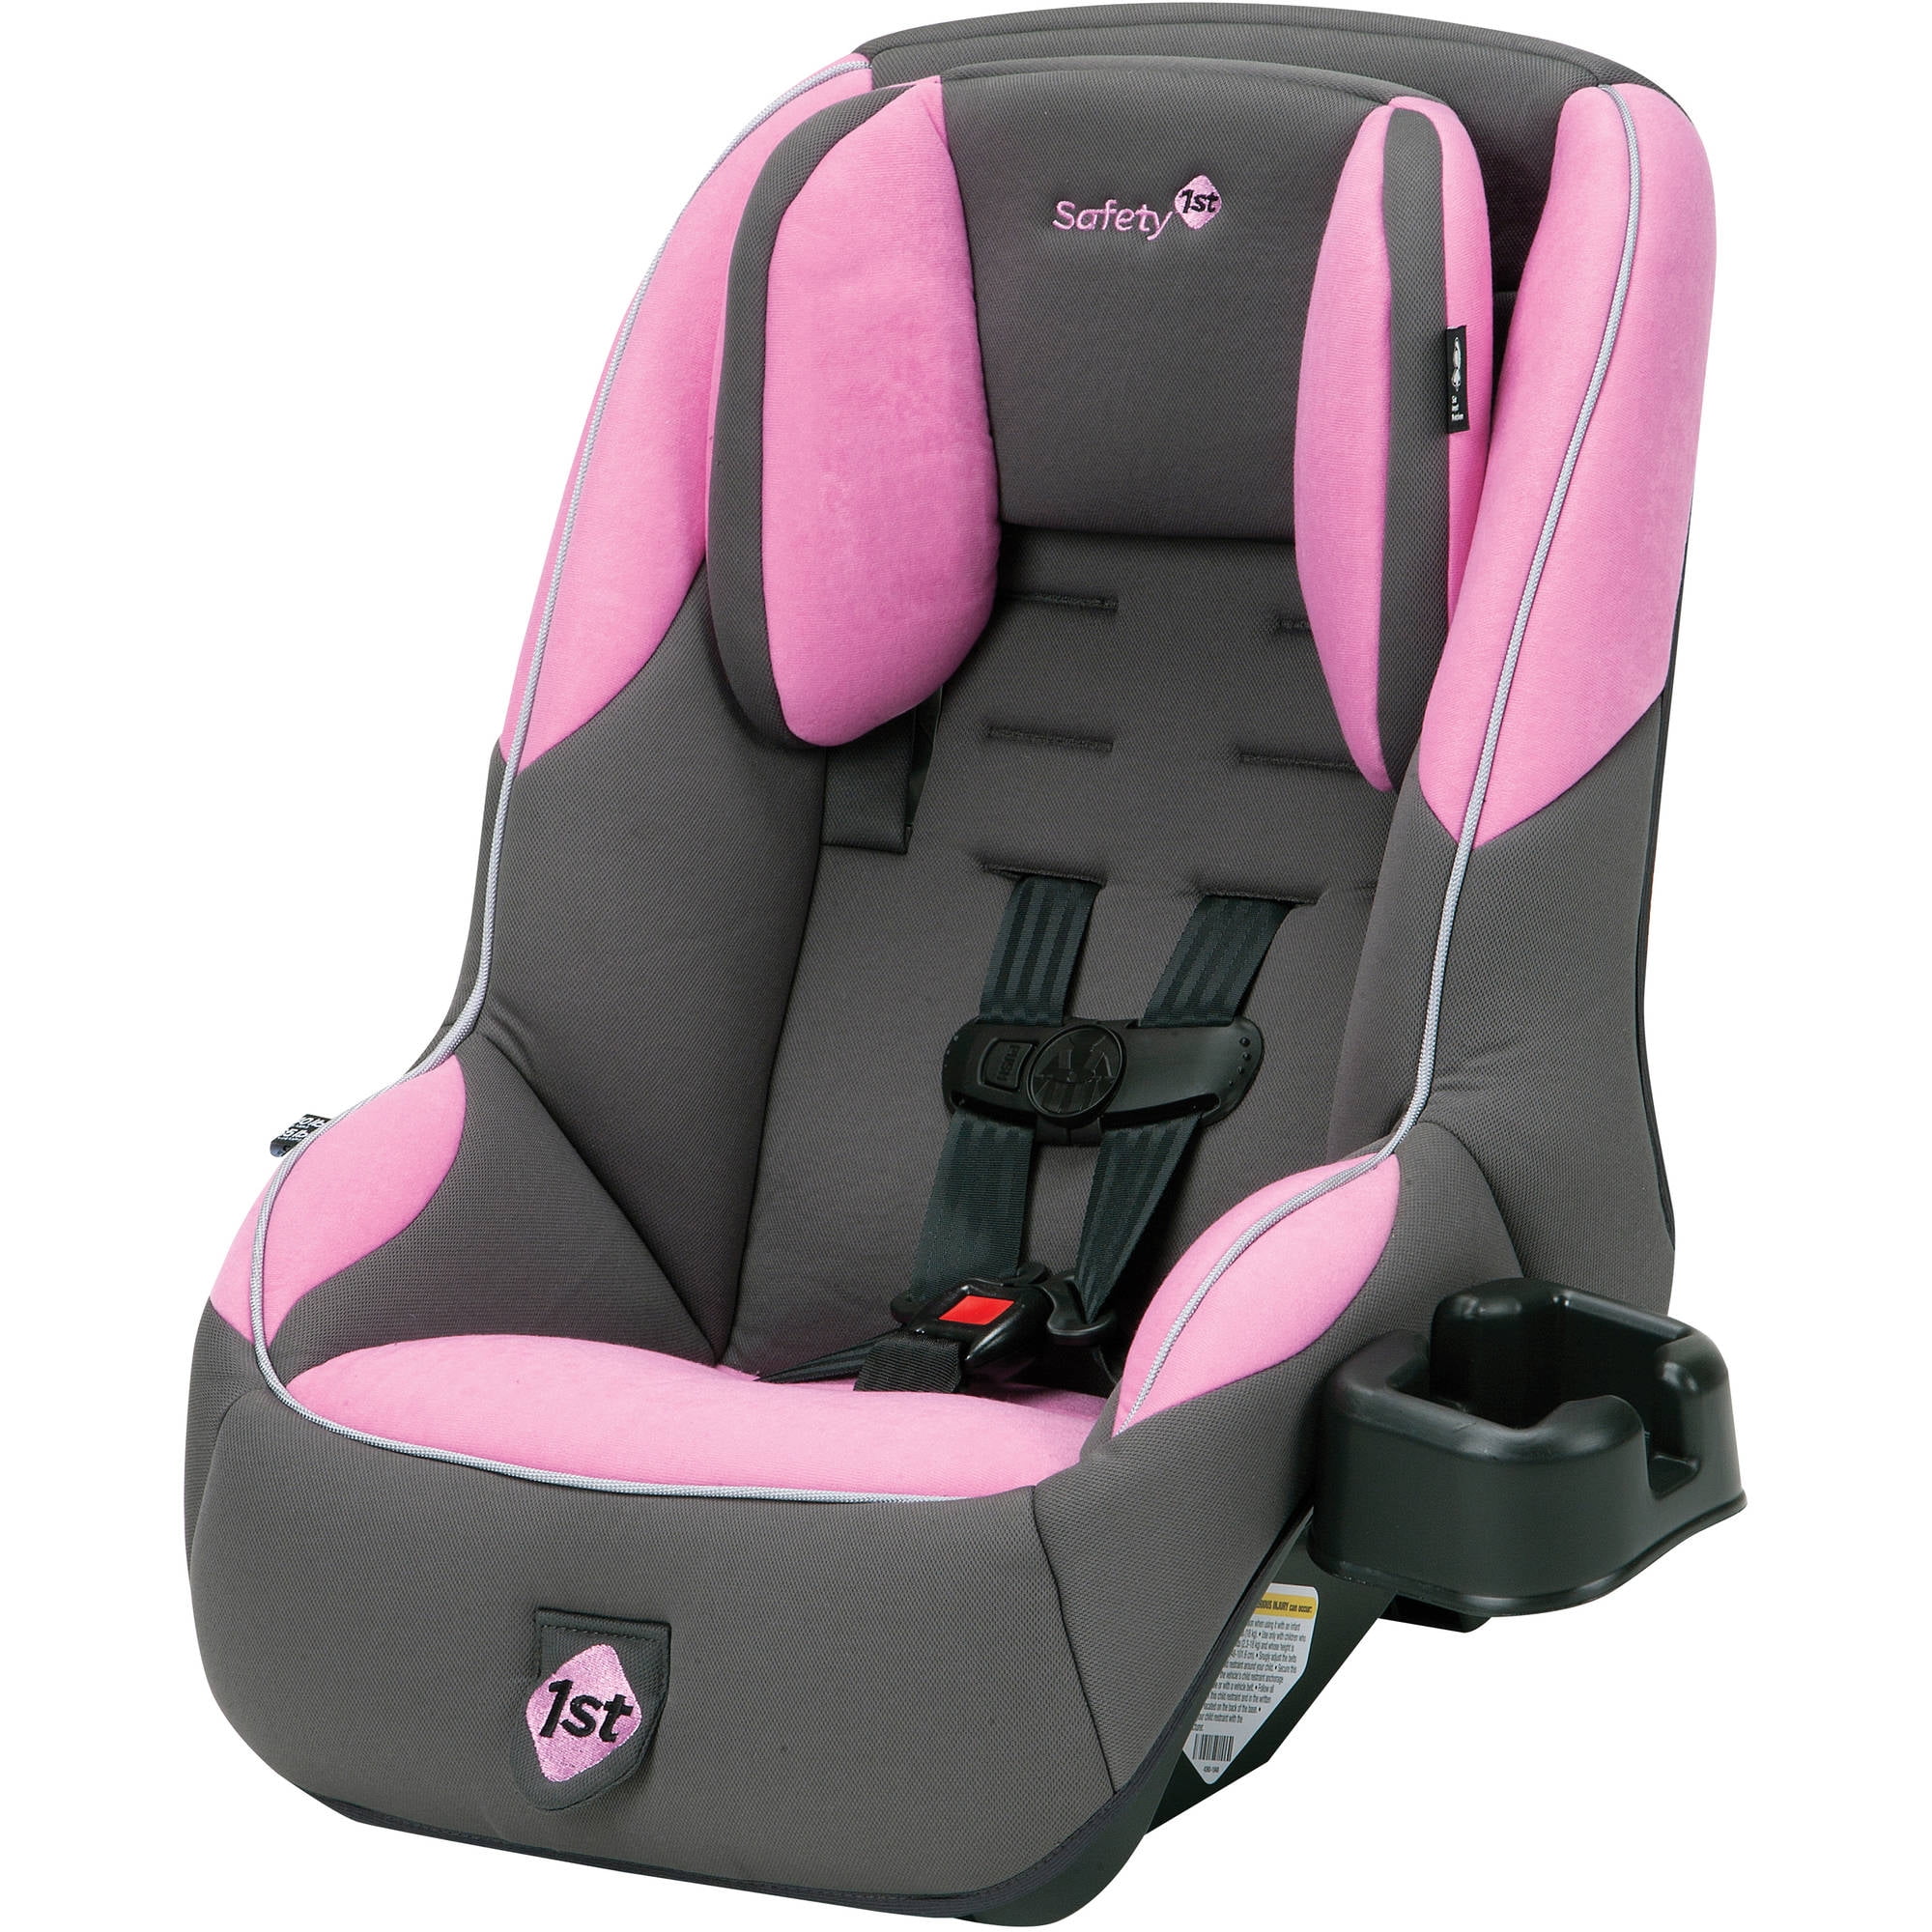 Safety 1st Guide 65 Sport Convertible Car Seat, Choose Your Color